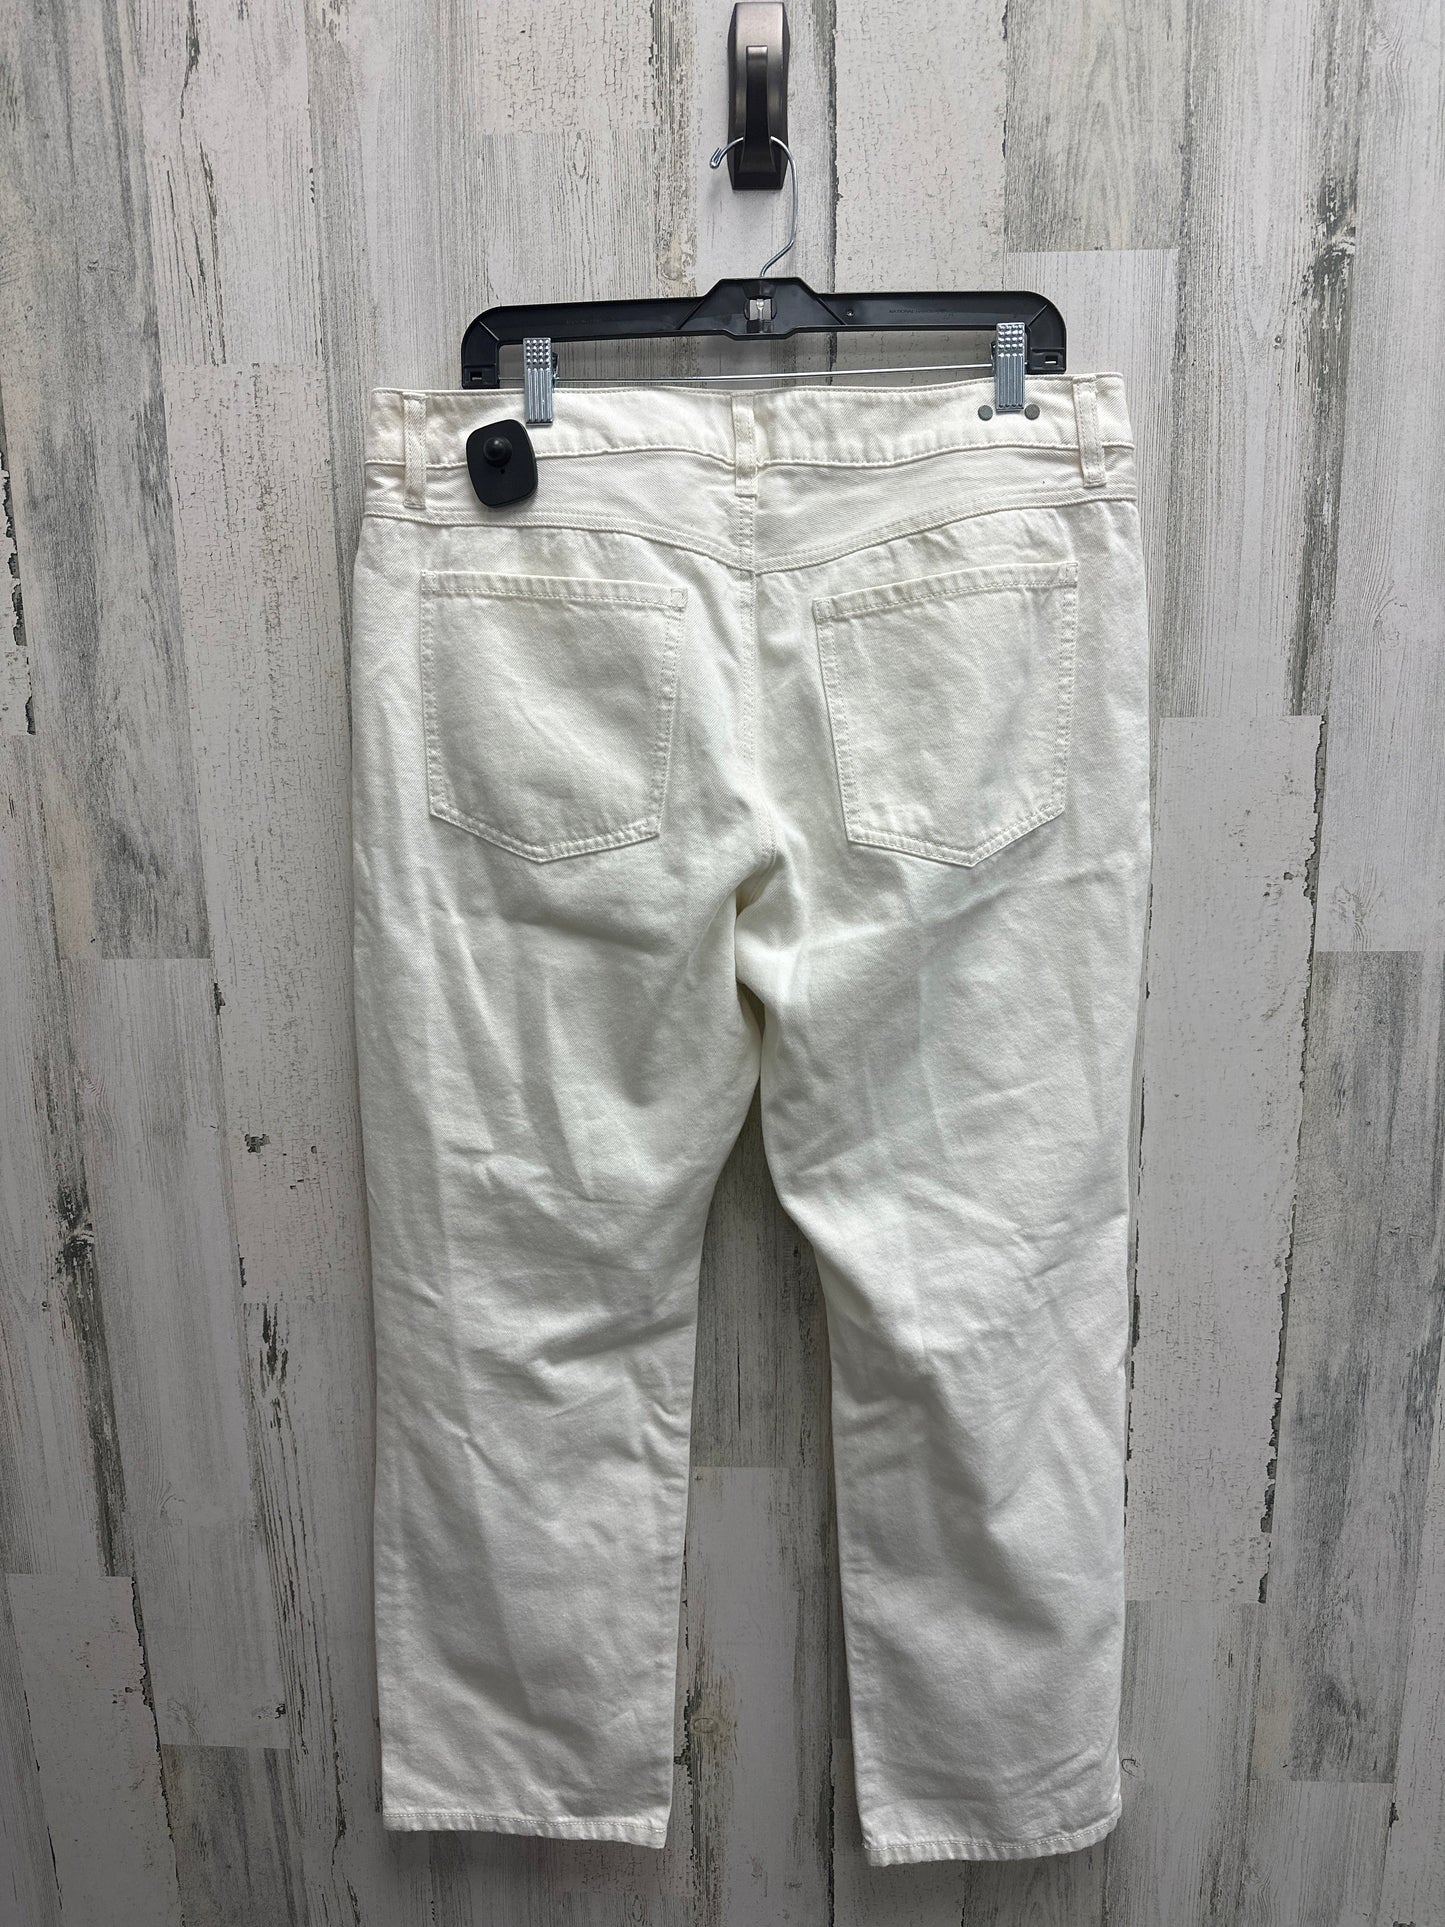 Jeans Relaxed/boyfriend By Cabi  Size: 12